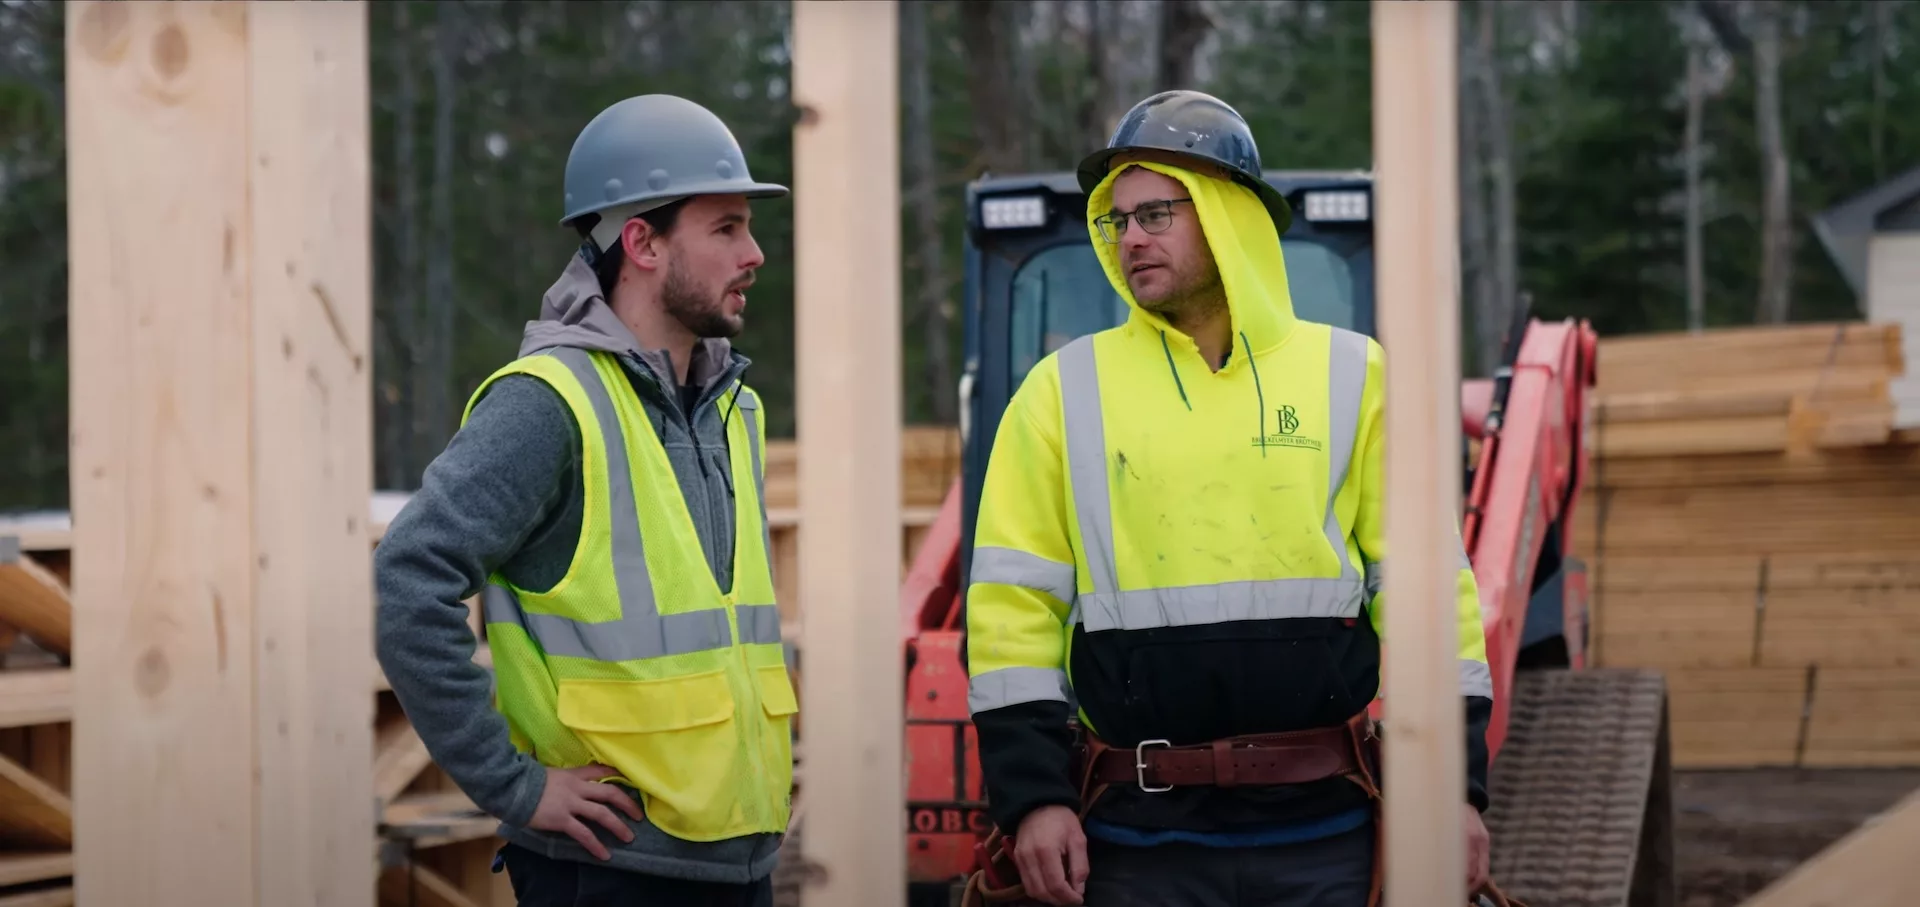 2 men in reflective clothing talking on a building site